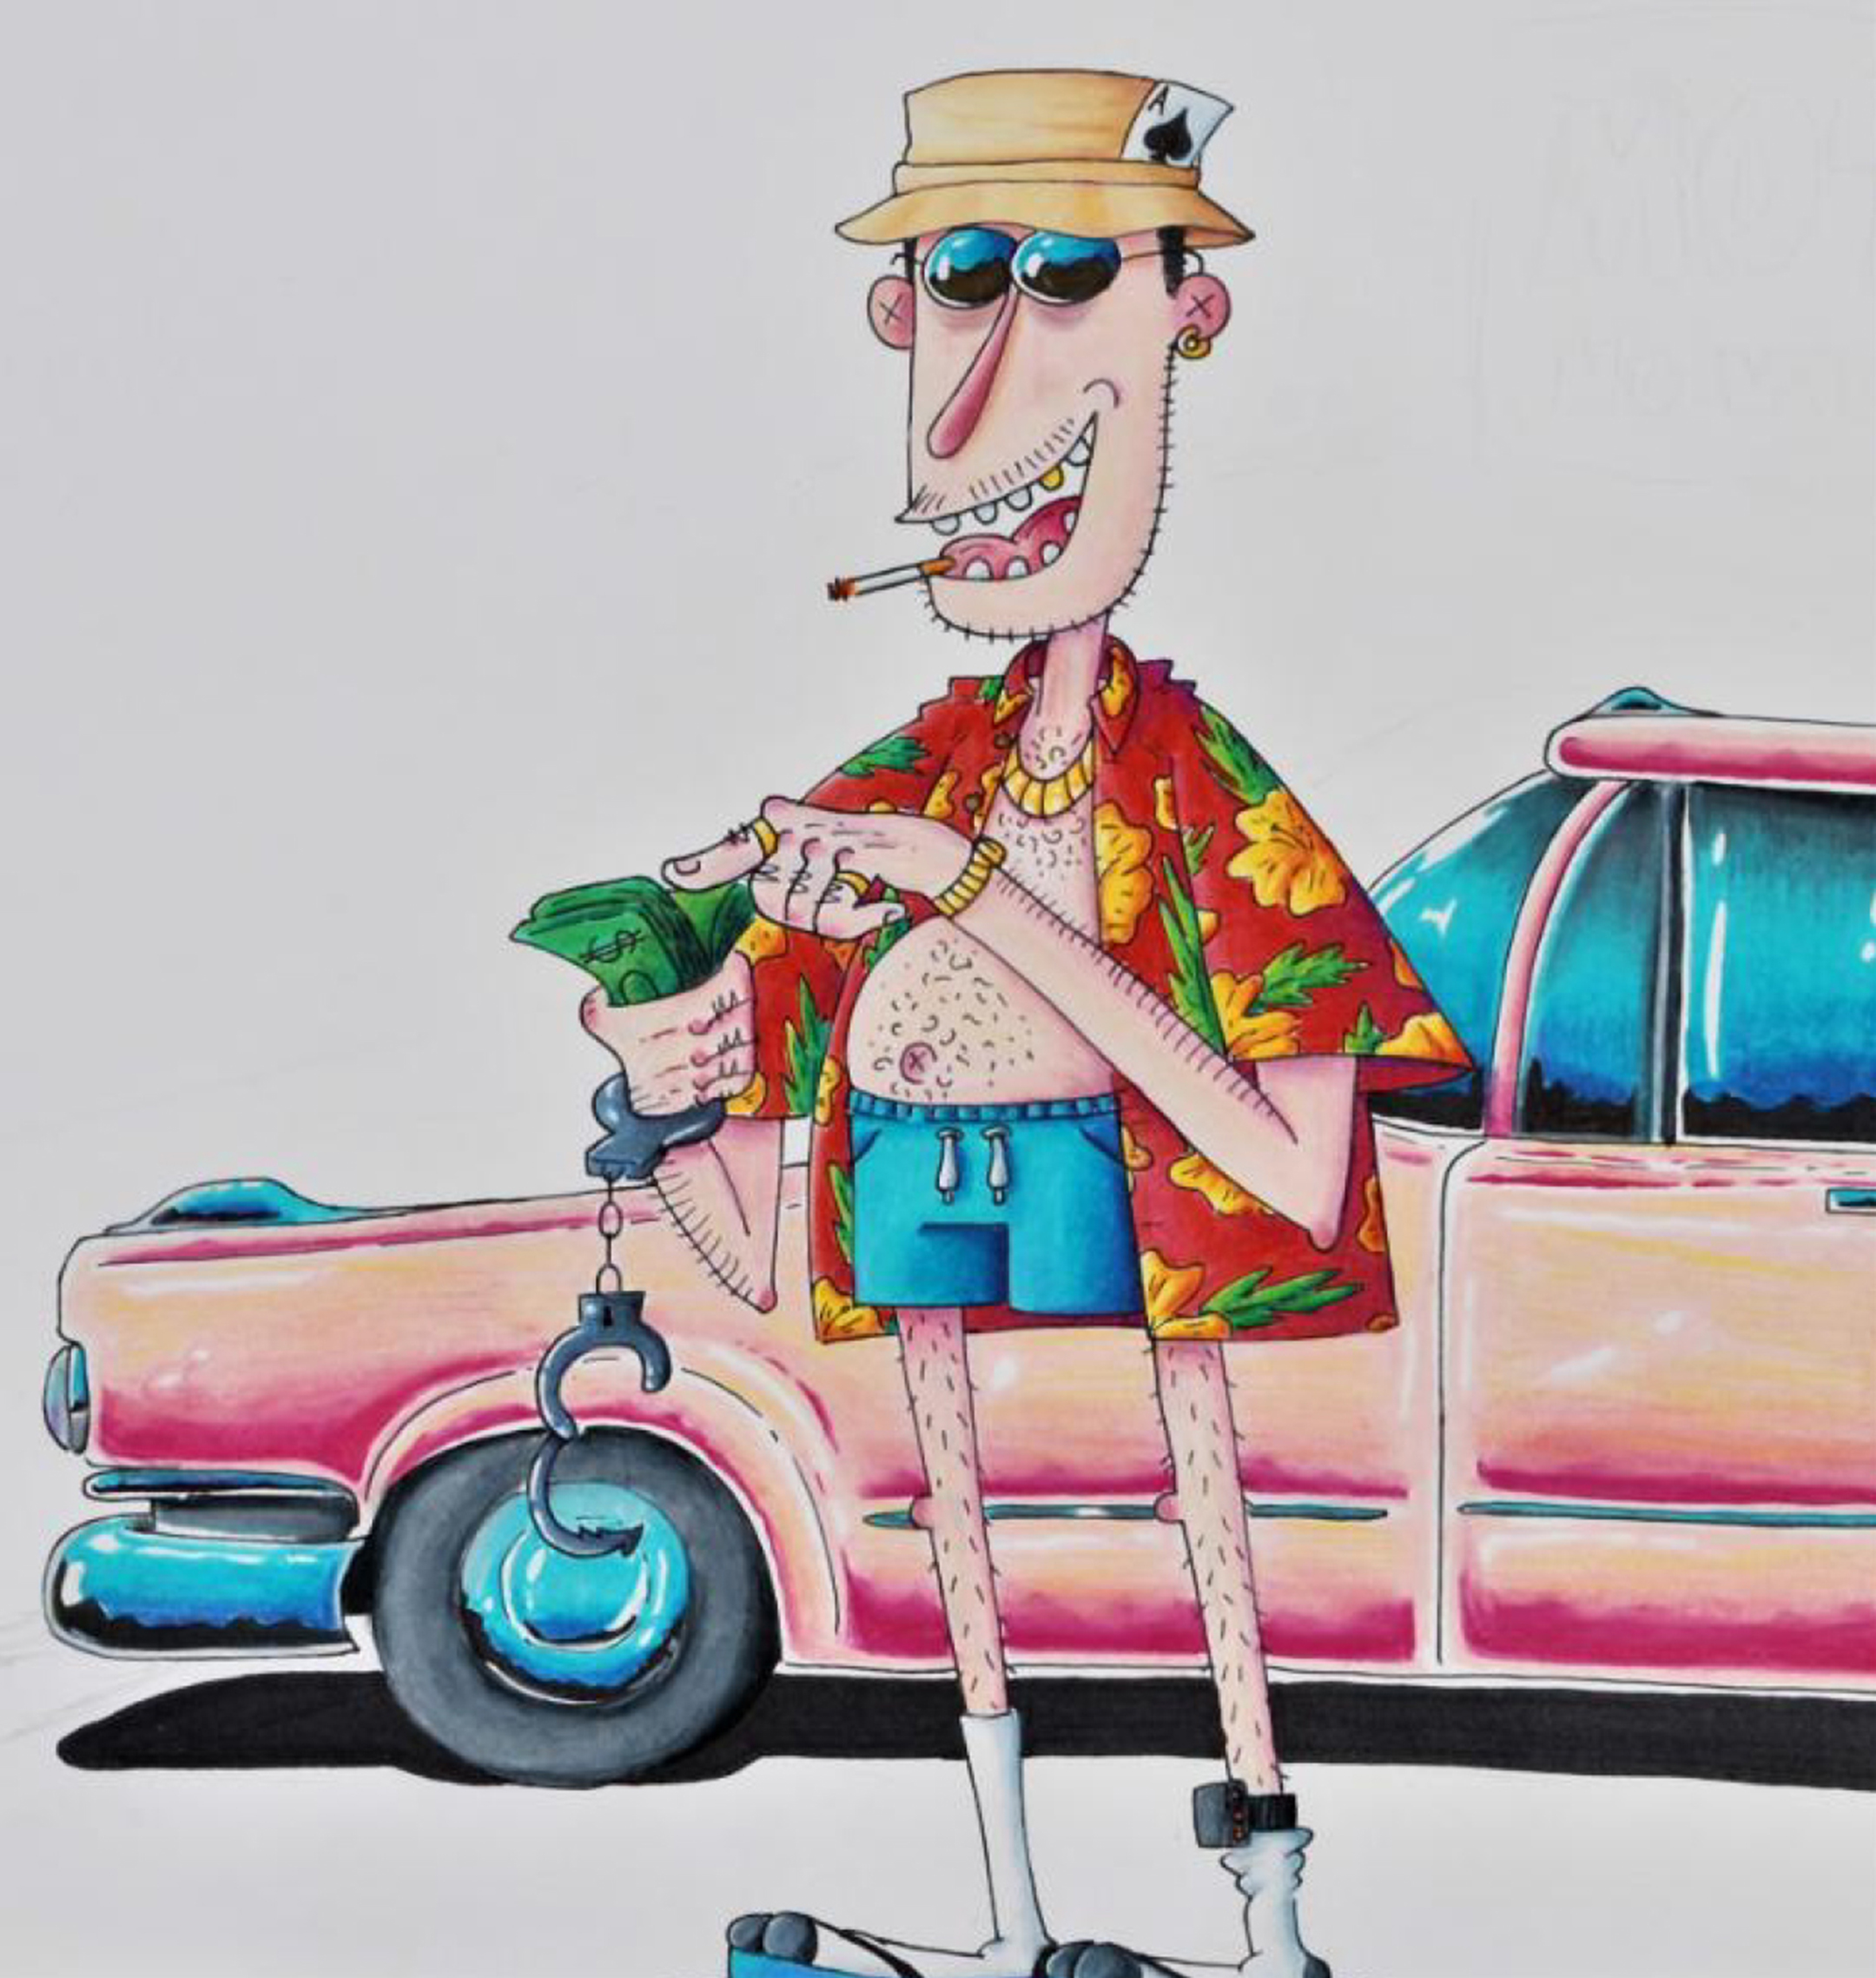 Illustrated representation of author hunter s. Thompson, wearing a floppy hat, sunglasses, open Hawaiian shirt, and shorts, counting money while smiling and standing in front of a convertible 